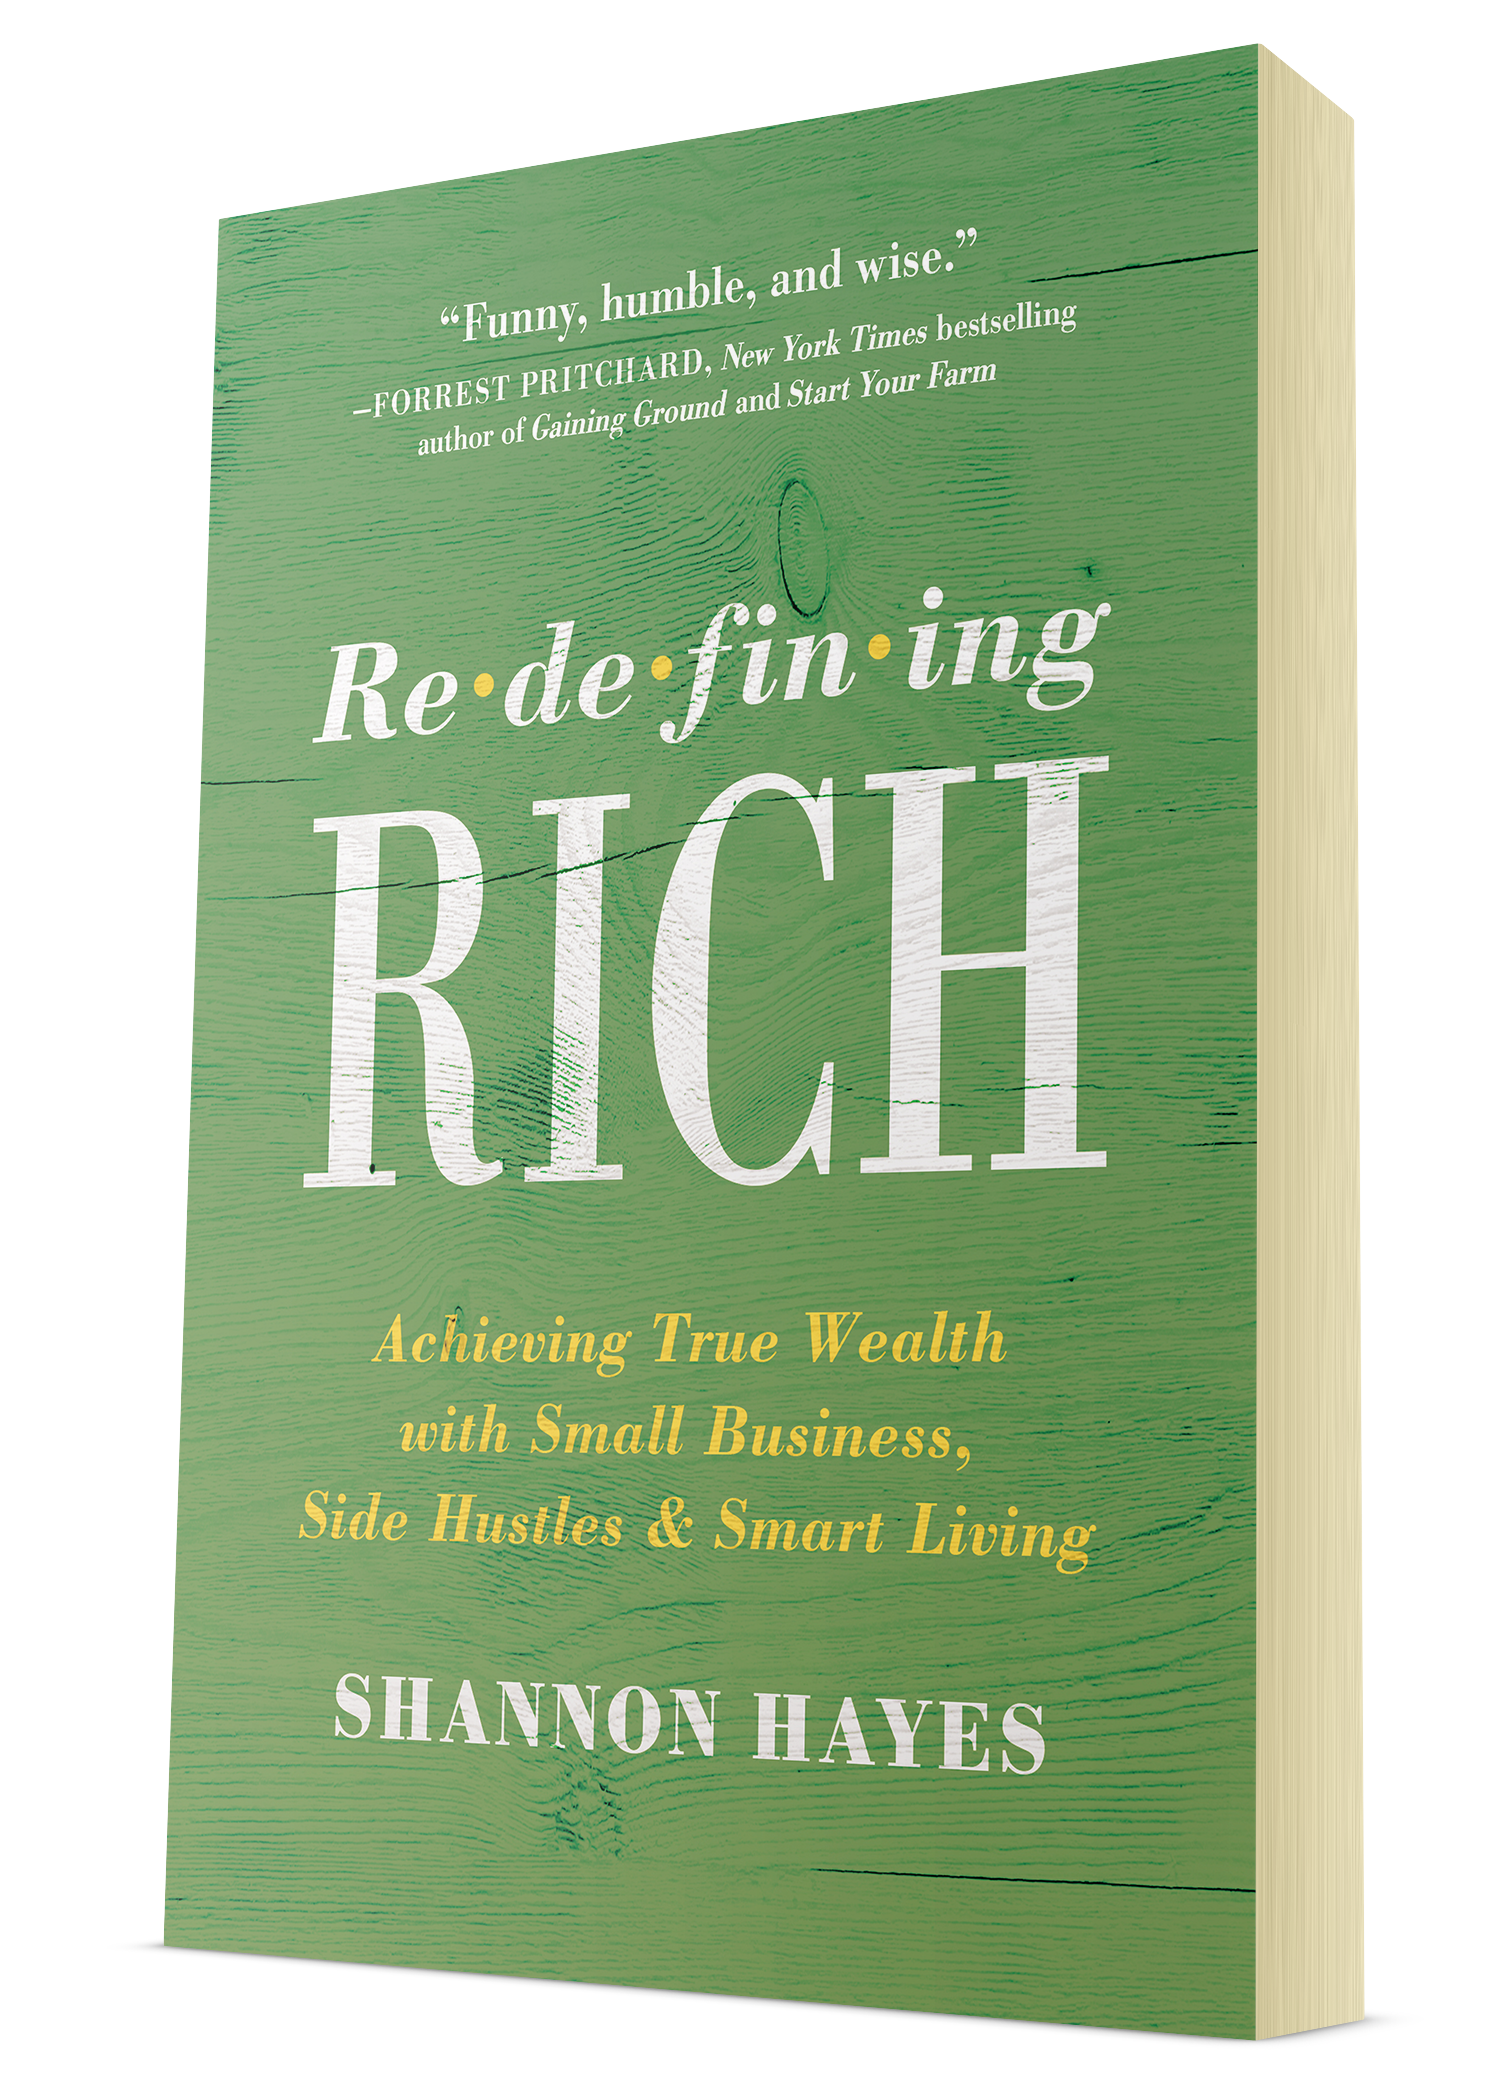 Redefining Rich by Shannon Hayes